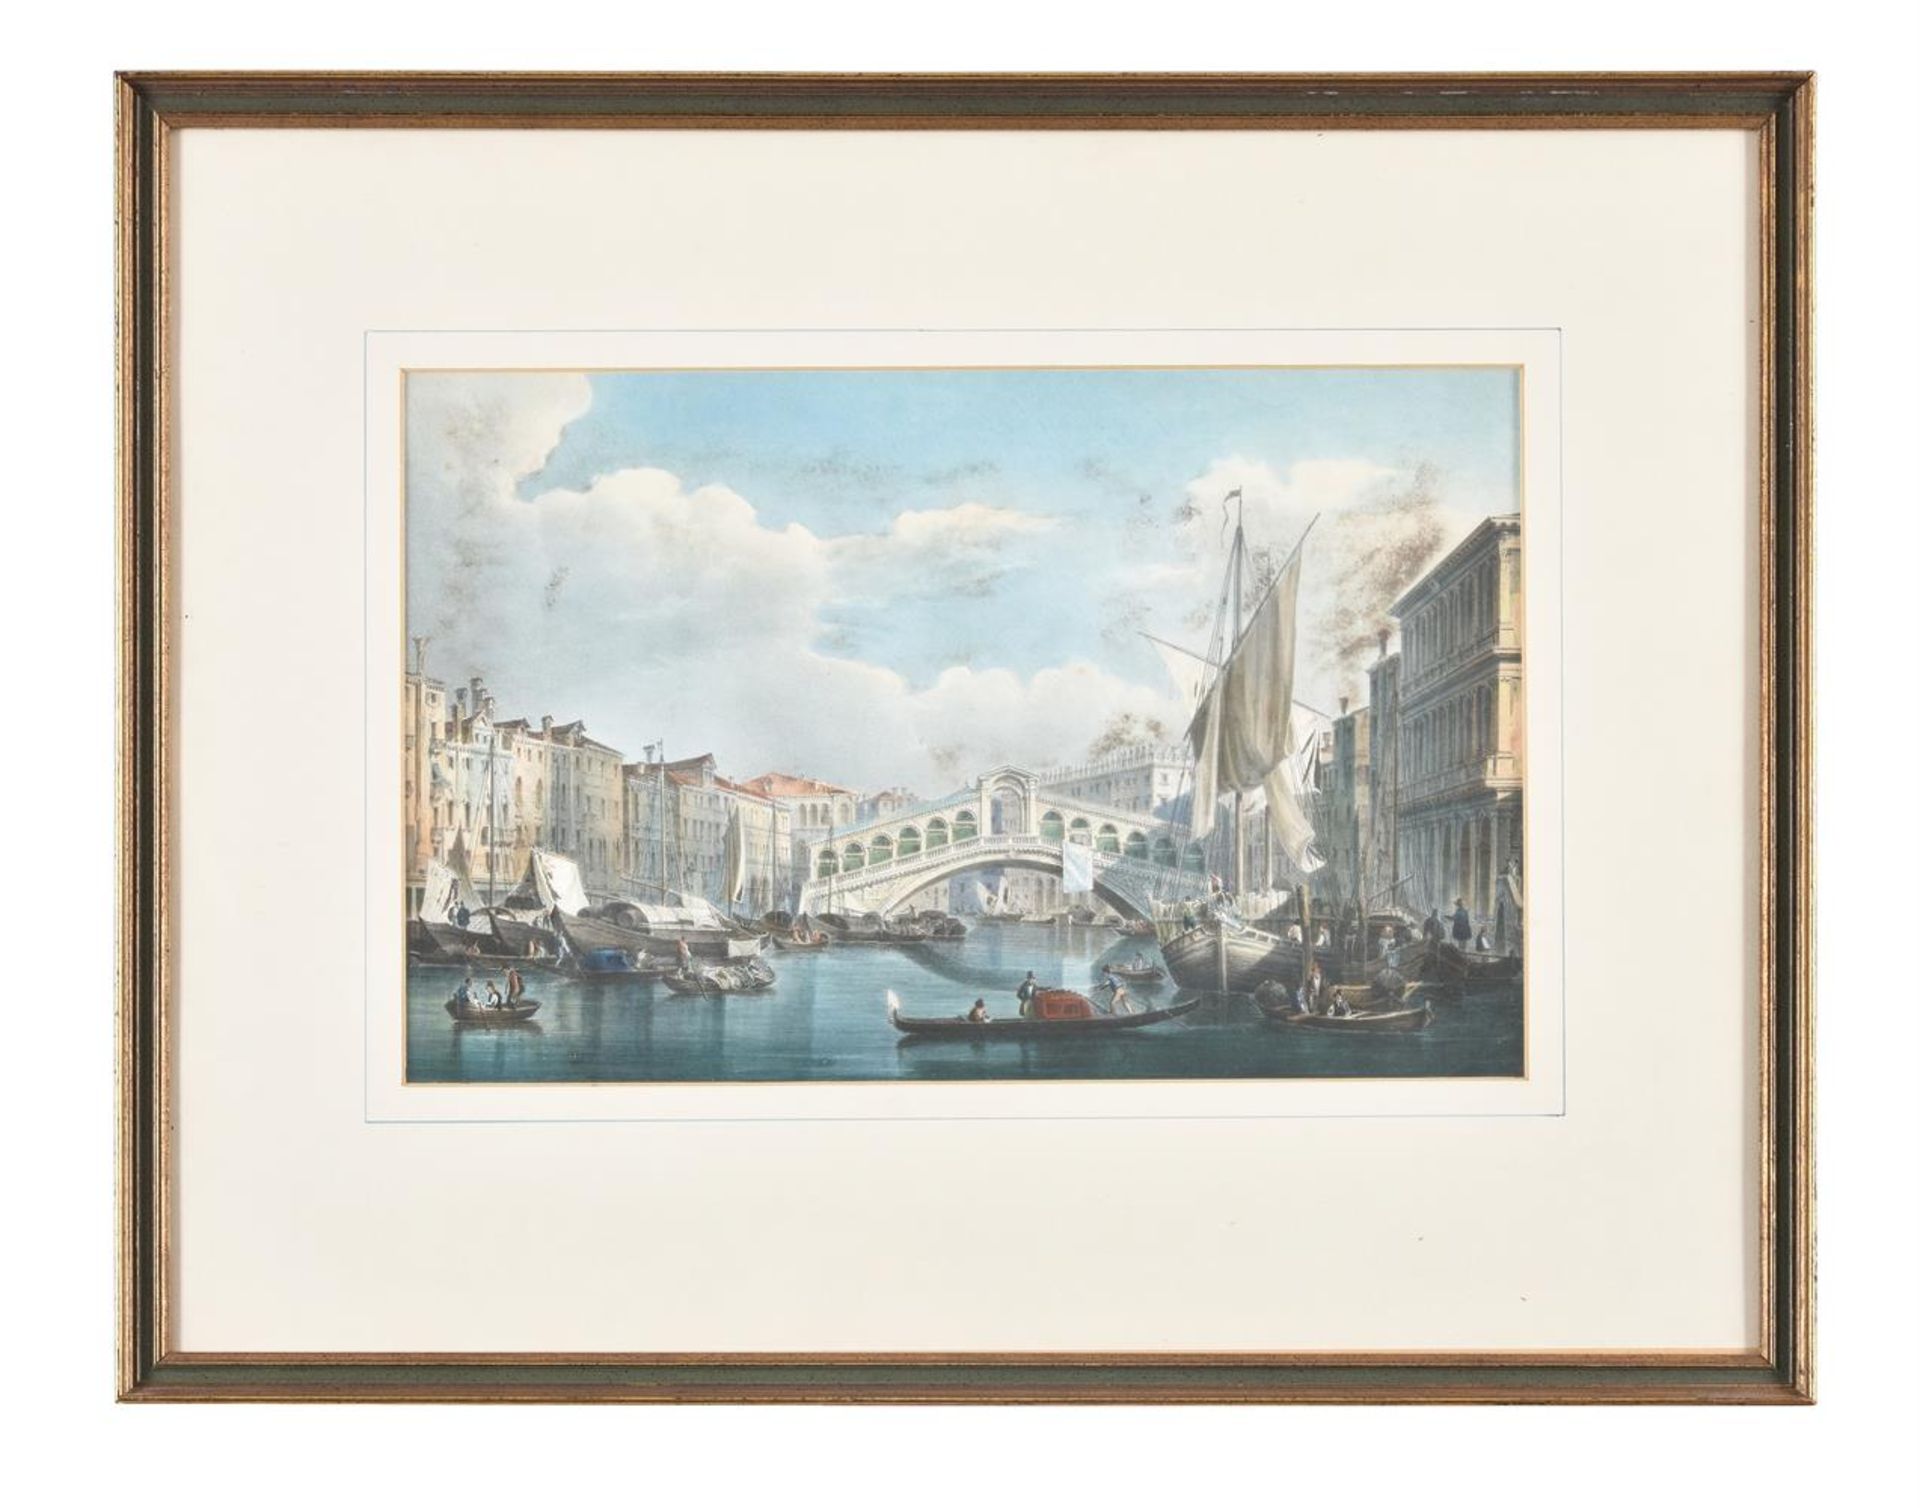 A pair of prints of Venetian views, hand-coloured, depicting the Rialto Bridge and St. Mark's Square